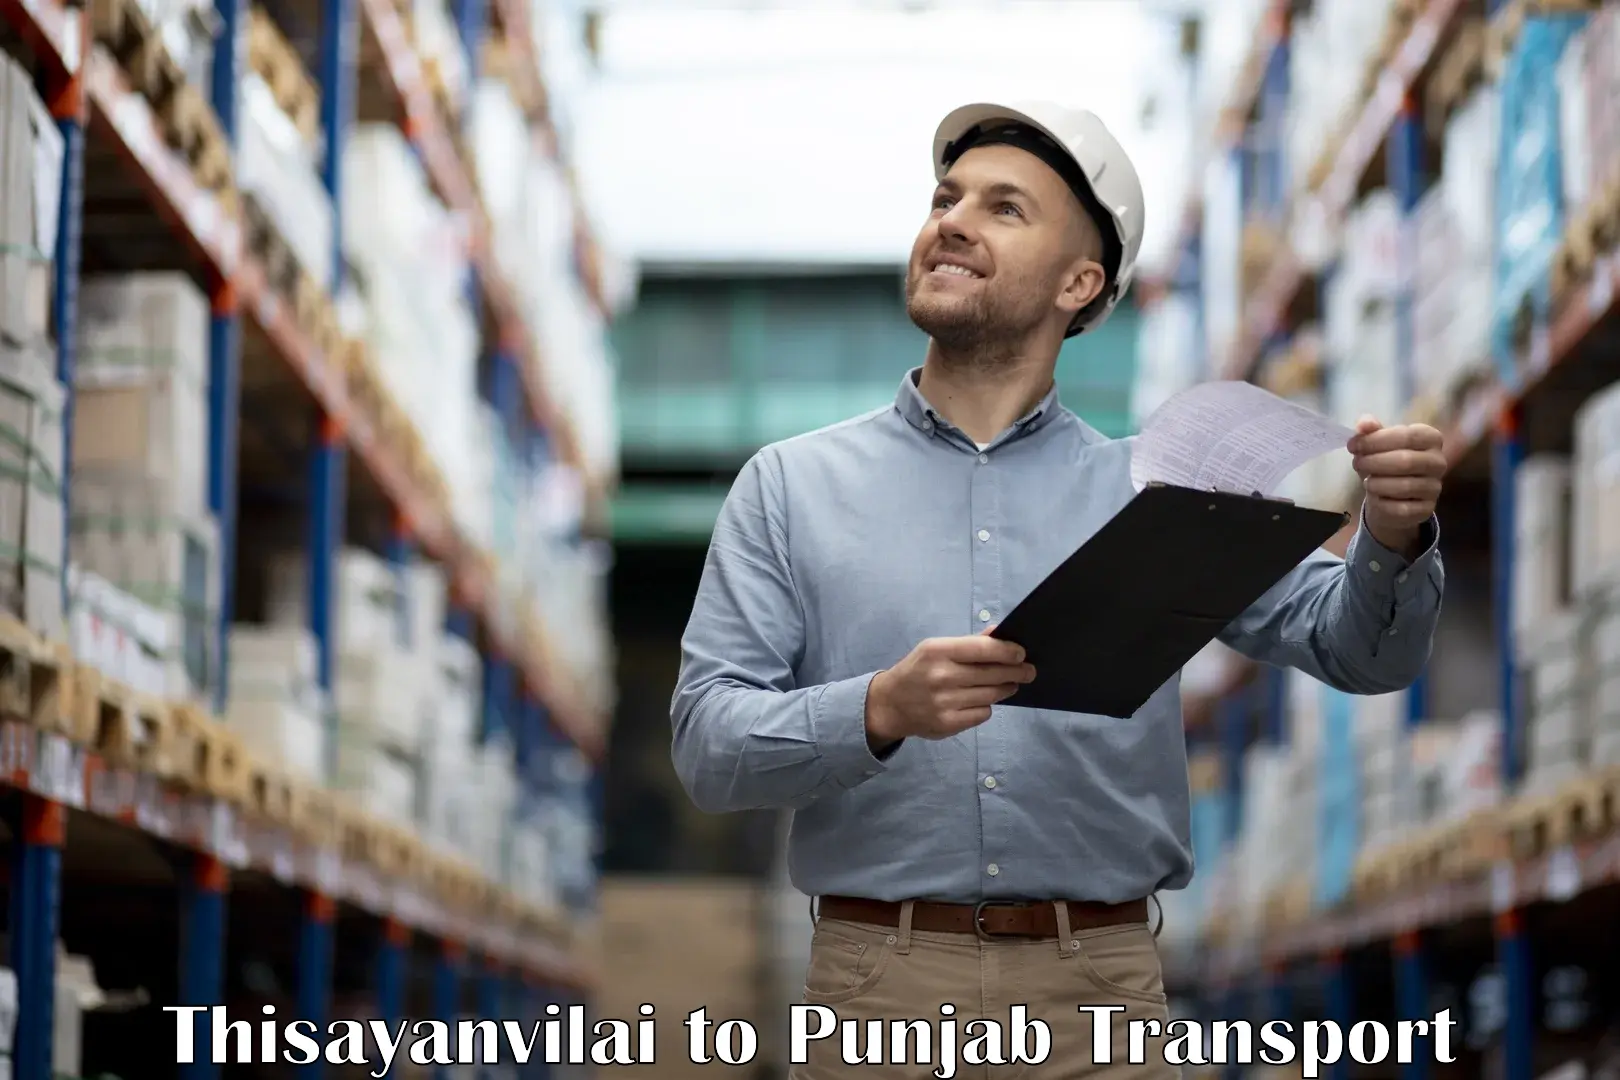 Goods delivery service Thisayanvilai to Begowal